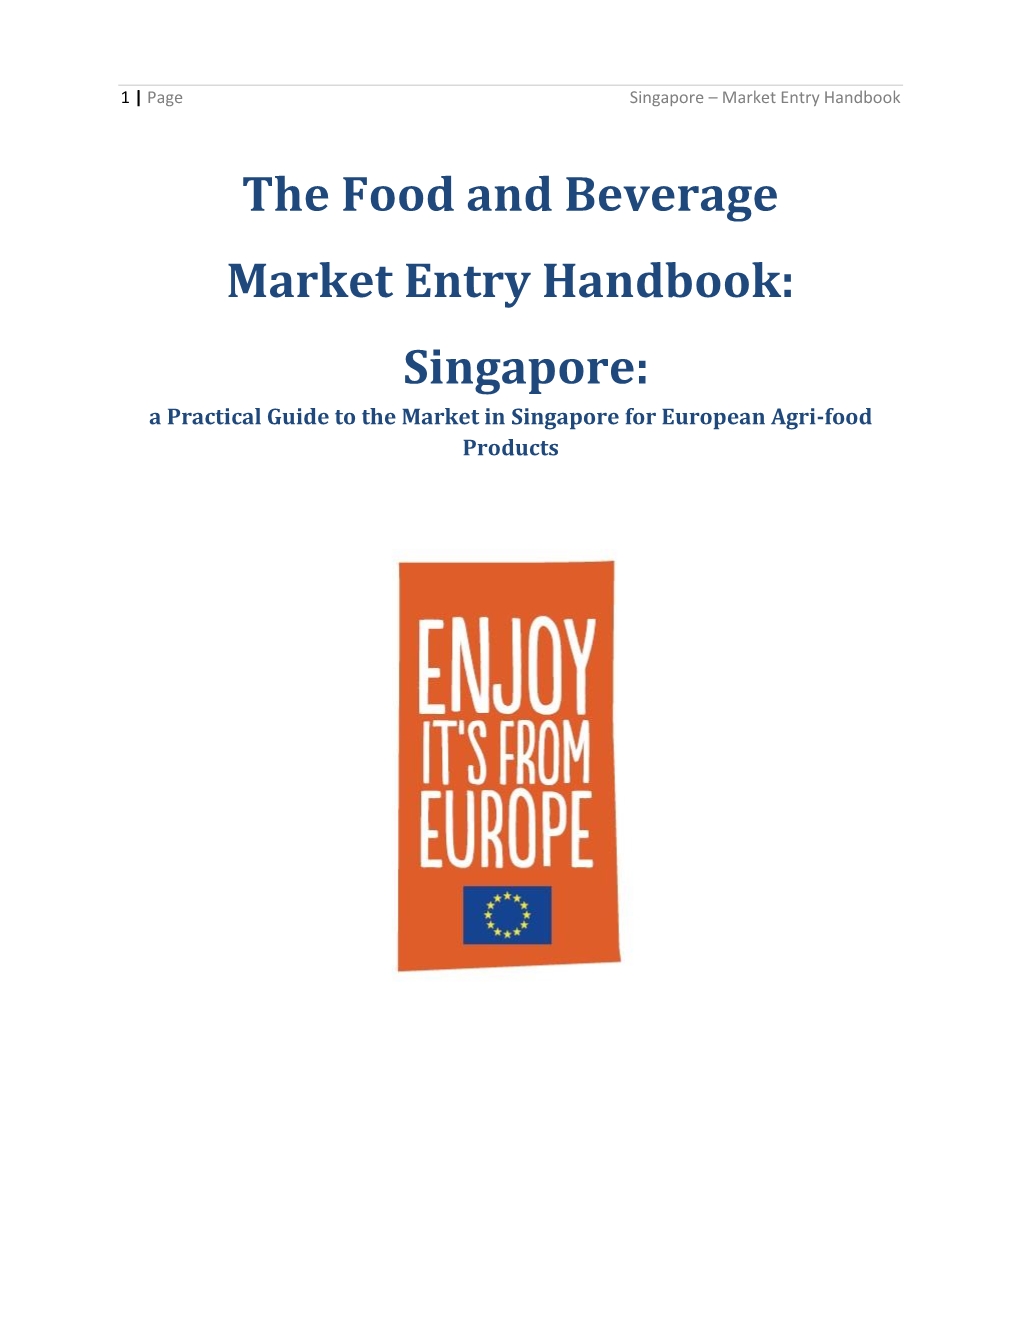 The Food and Beverage Market Entry Handbook: Singapore